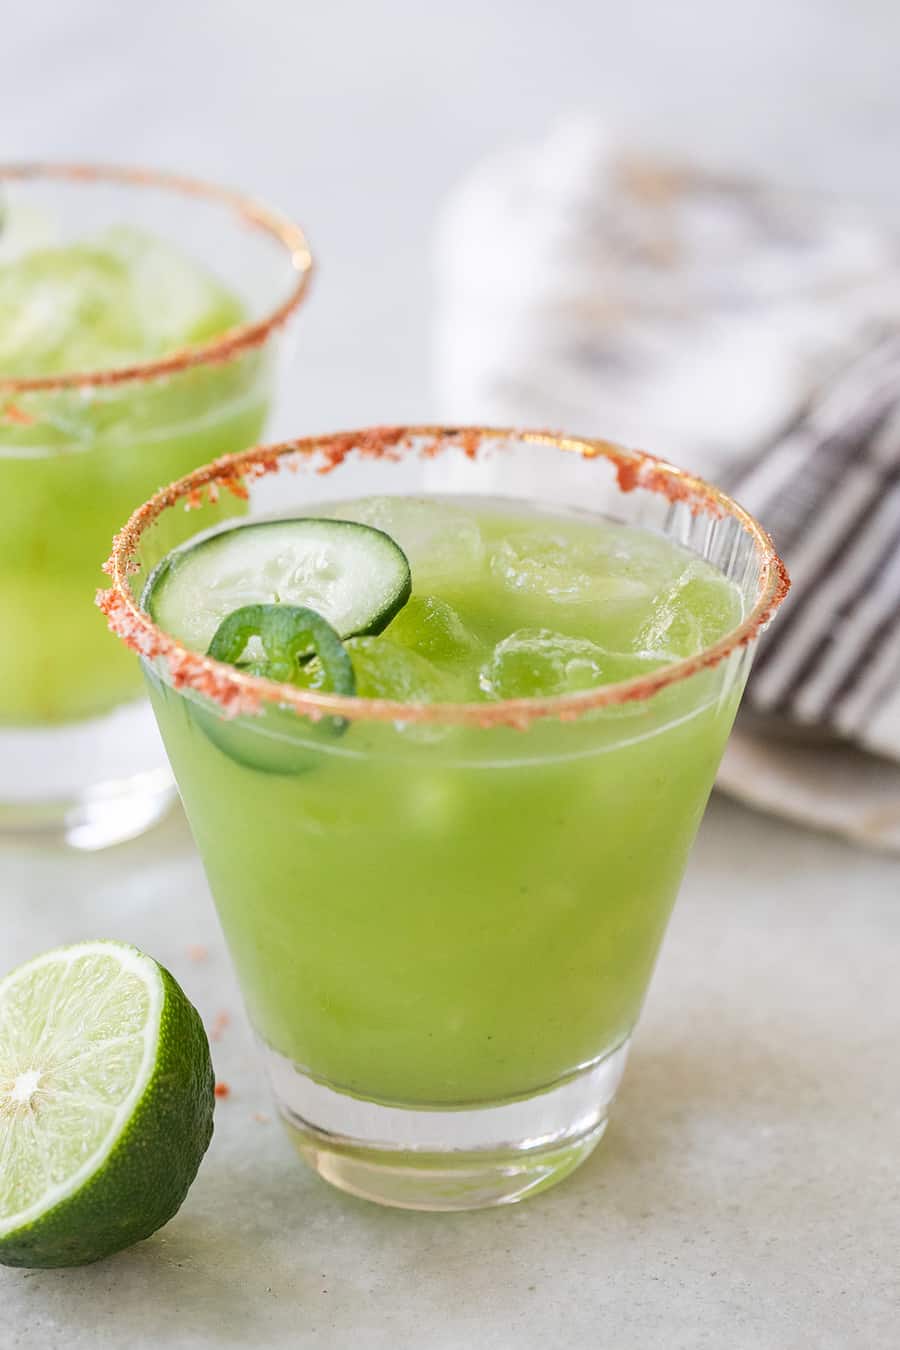 Spicy green cocktail with cucumber and jalapeño